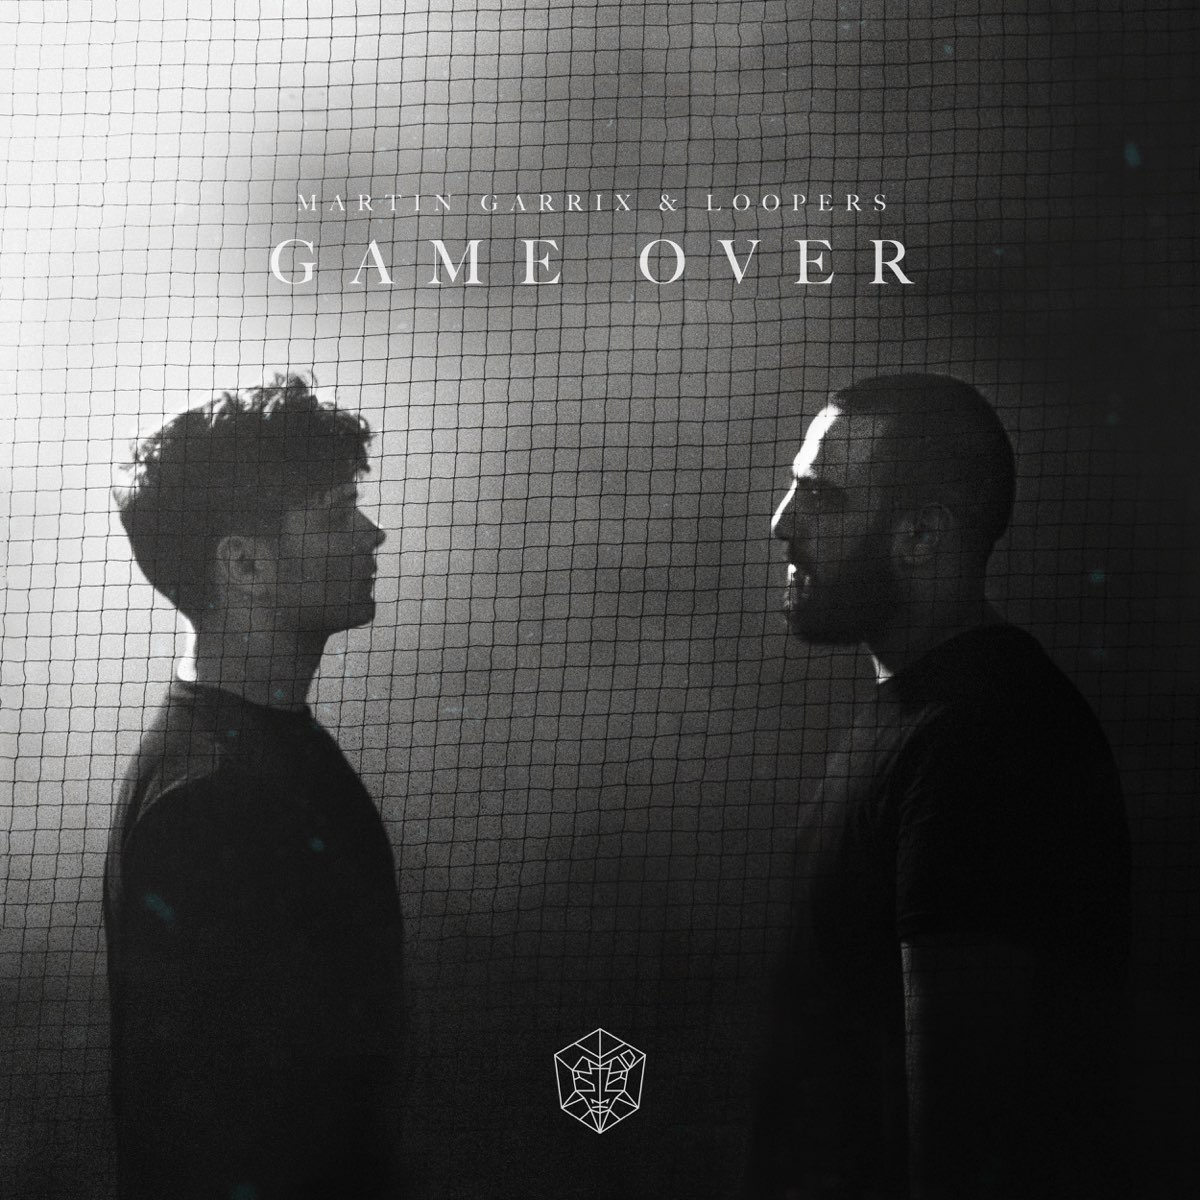 Game Over - Single by Martin Garrix & LOOPERS on Apple Music